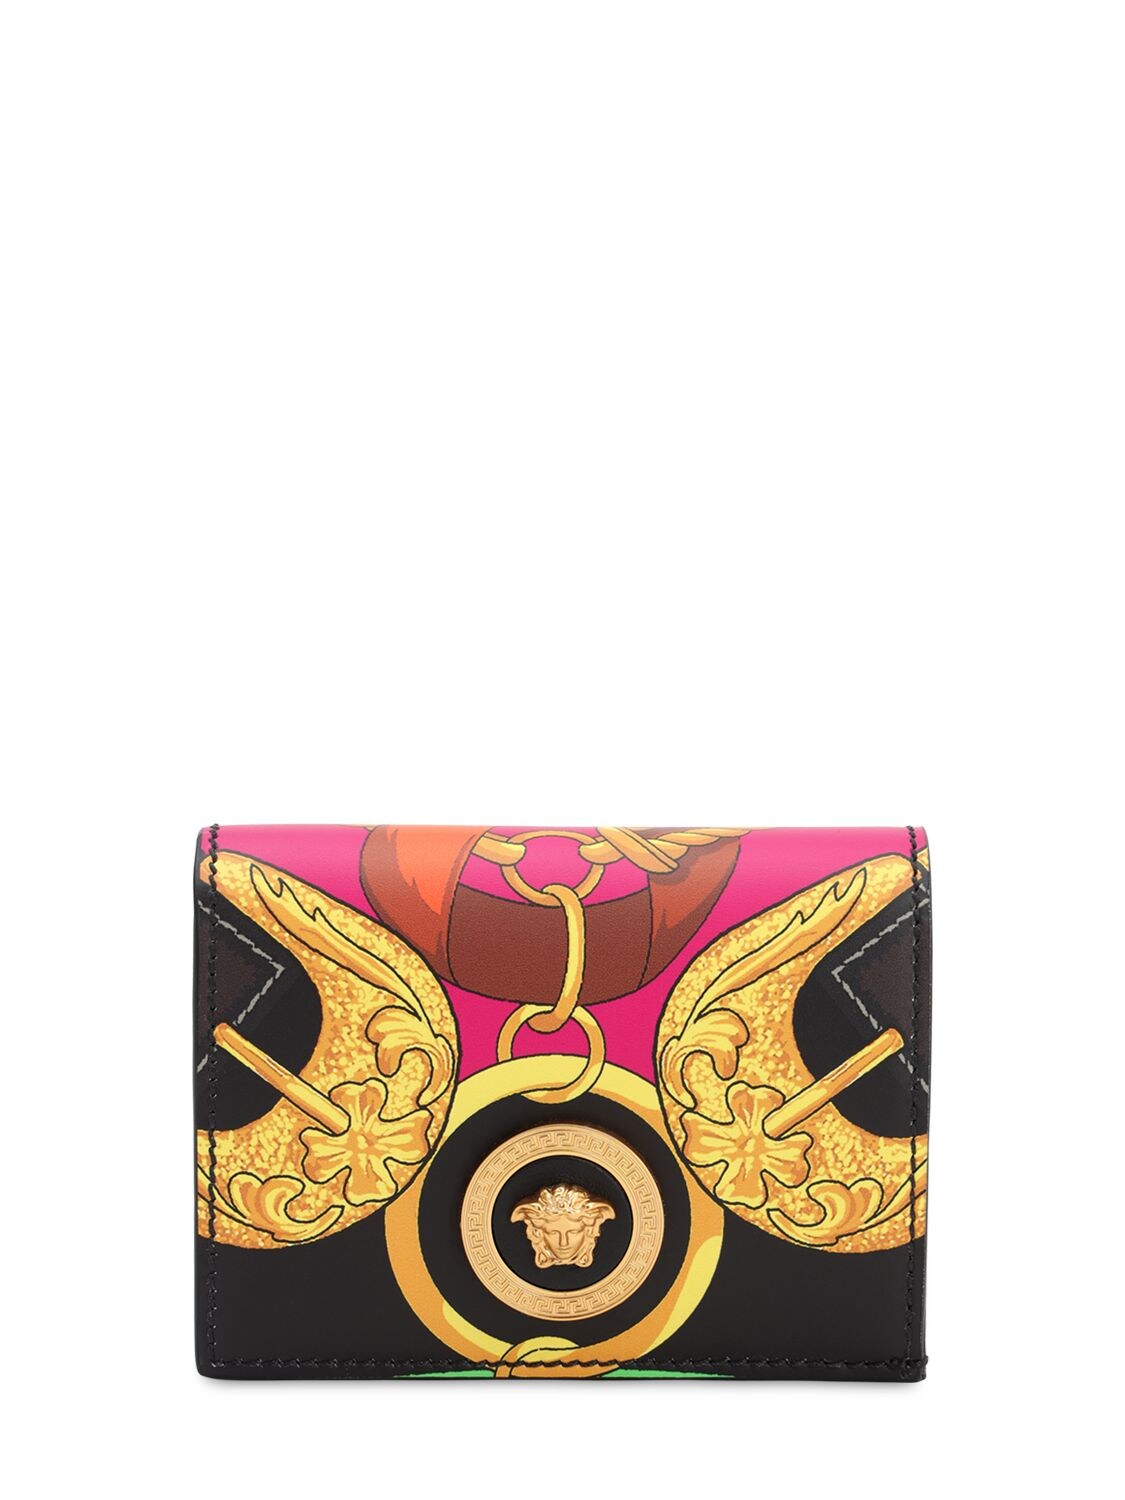 Versace Printed Leather Compact Wallet In Multicolor